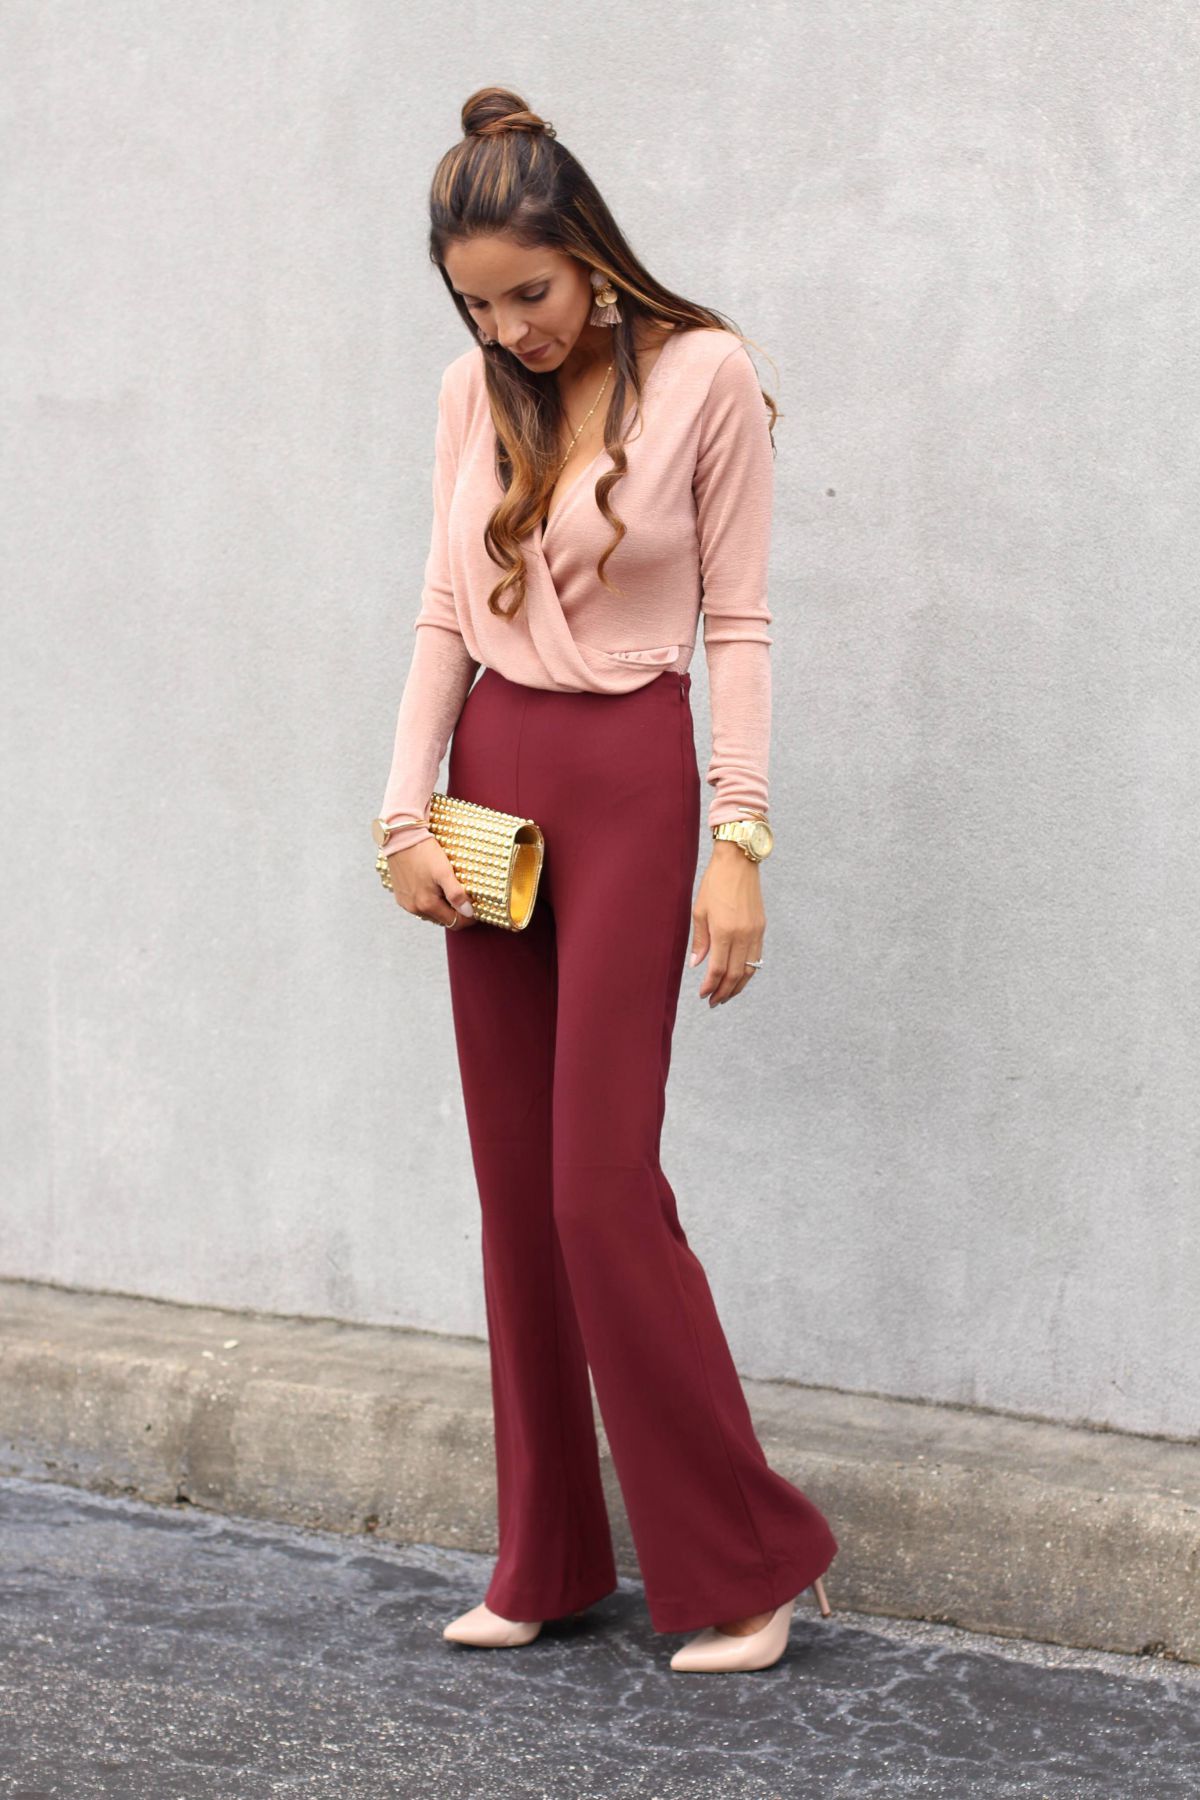 blush bodysuit paired with burgundy high-waist pants